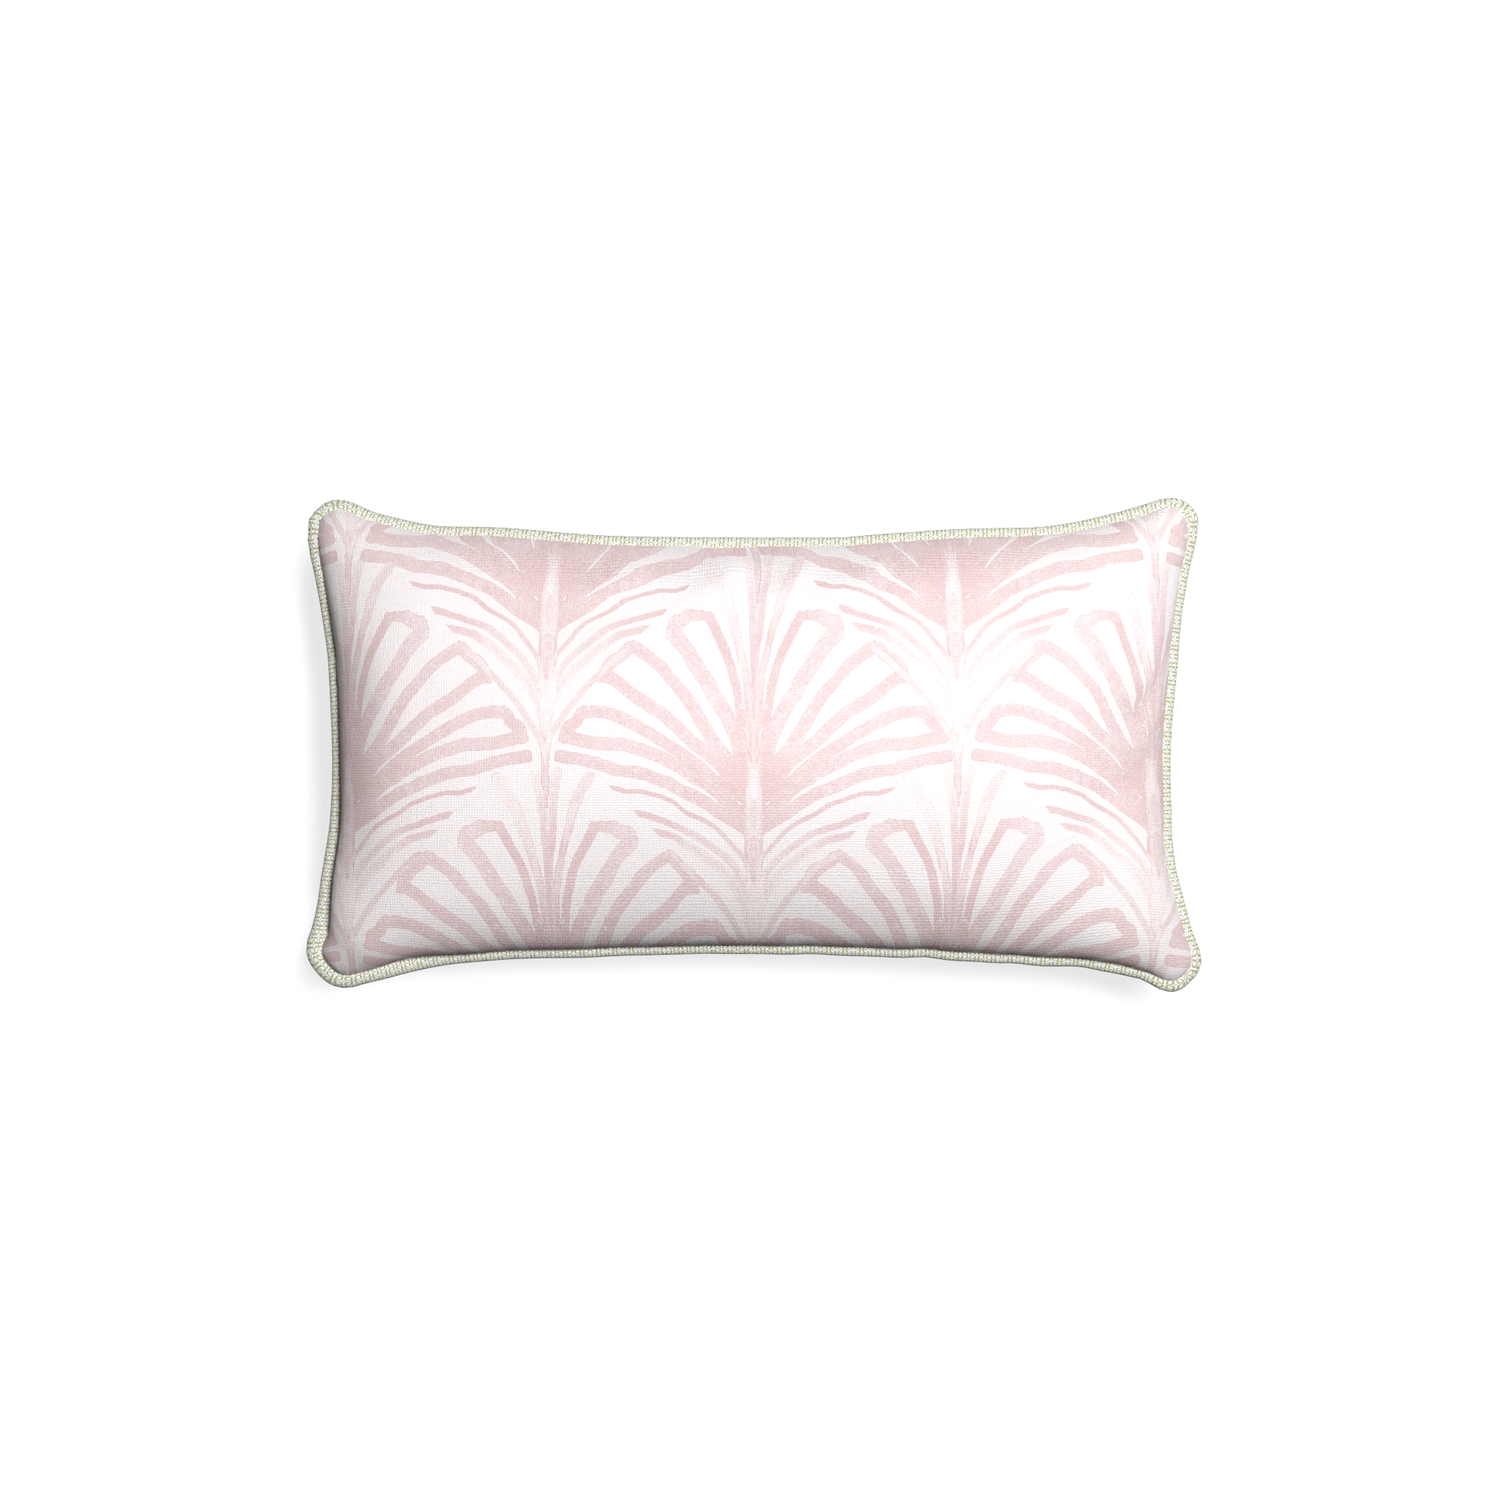 Petite-lumbar suzy rose custom rose pink palmpillow with l piping on white background